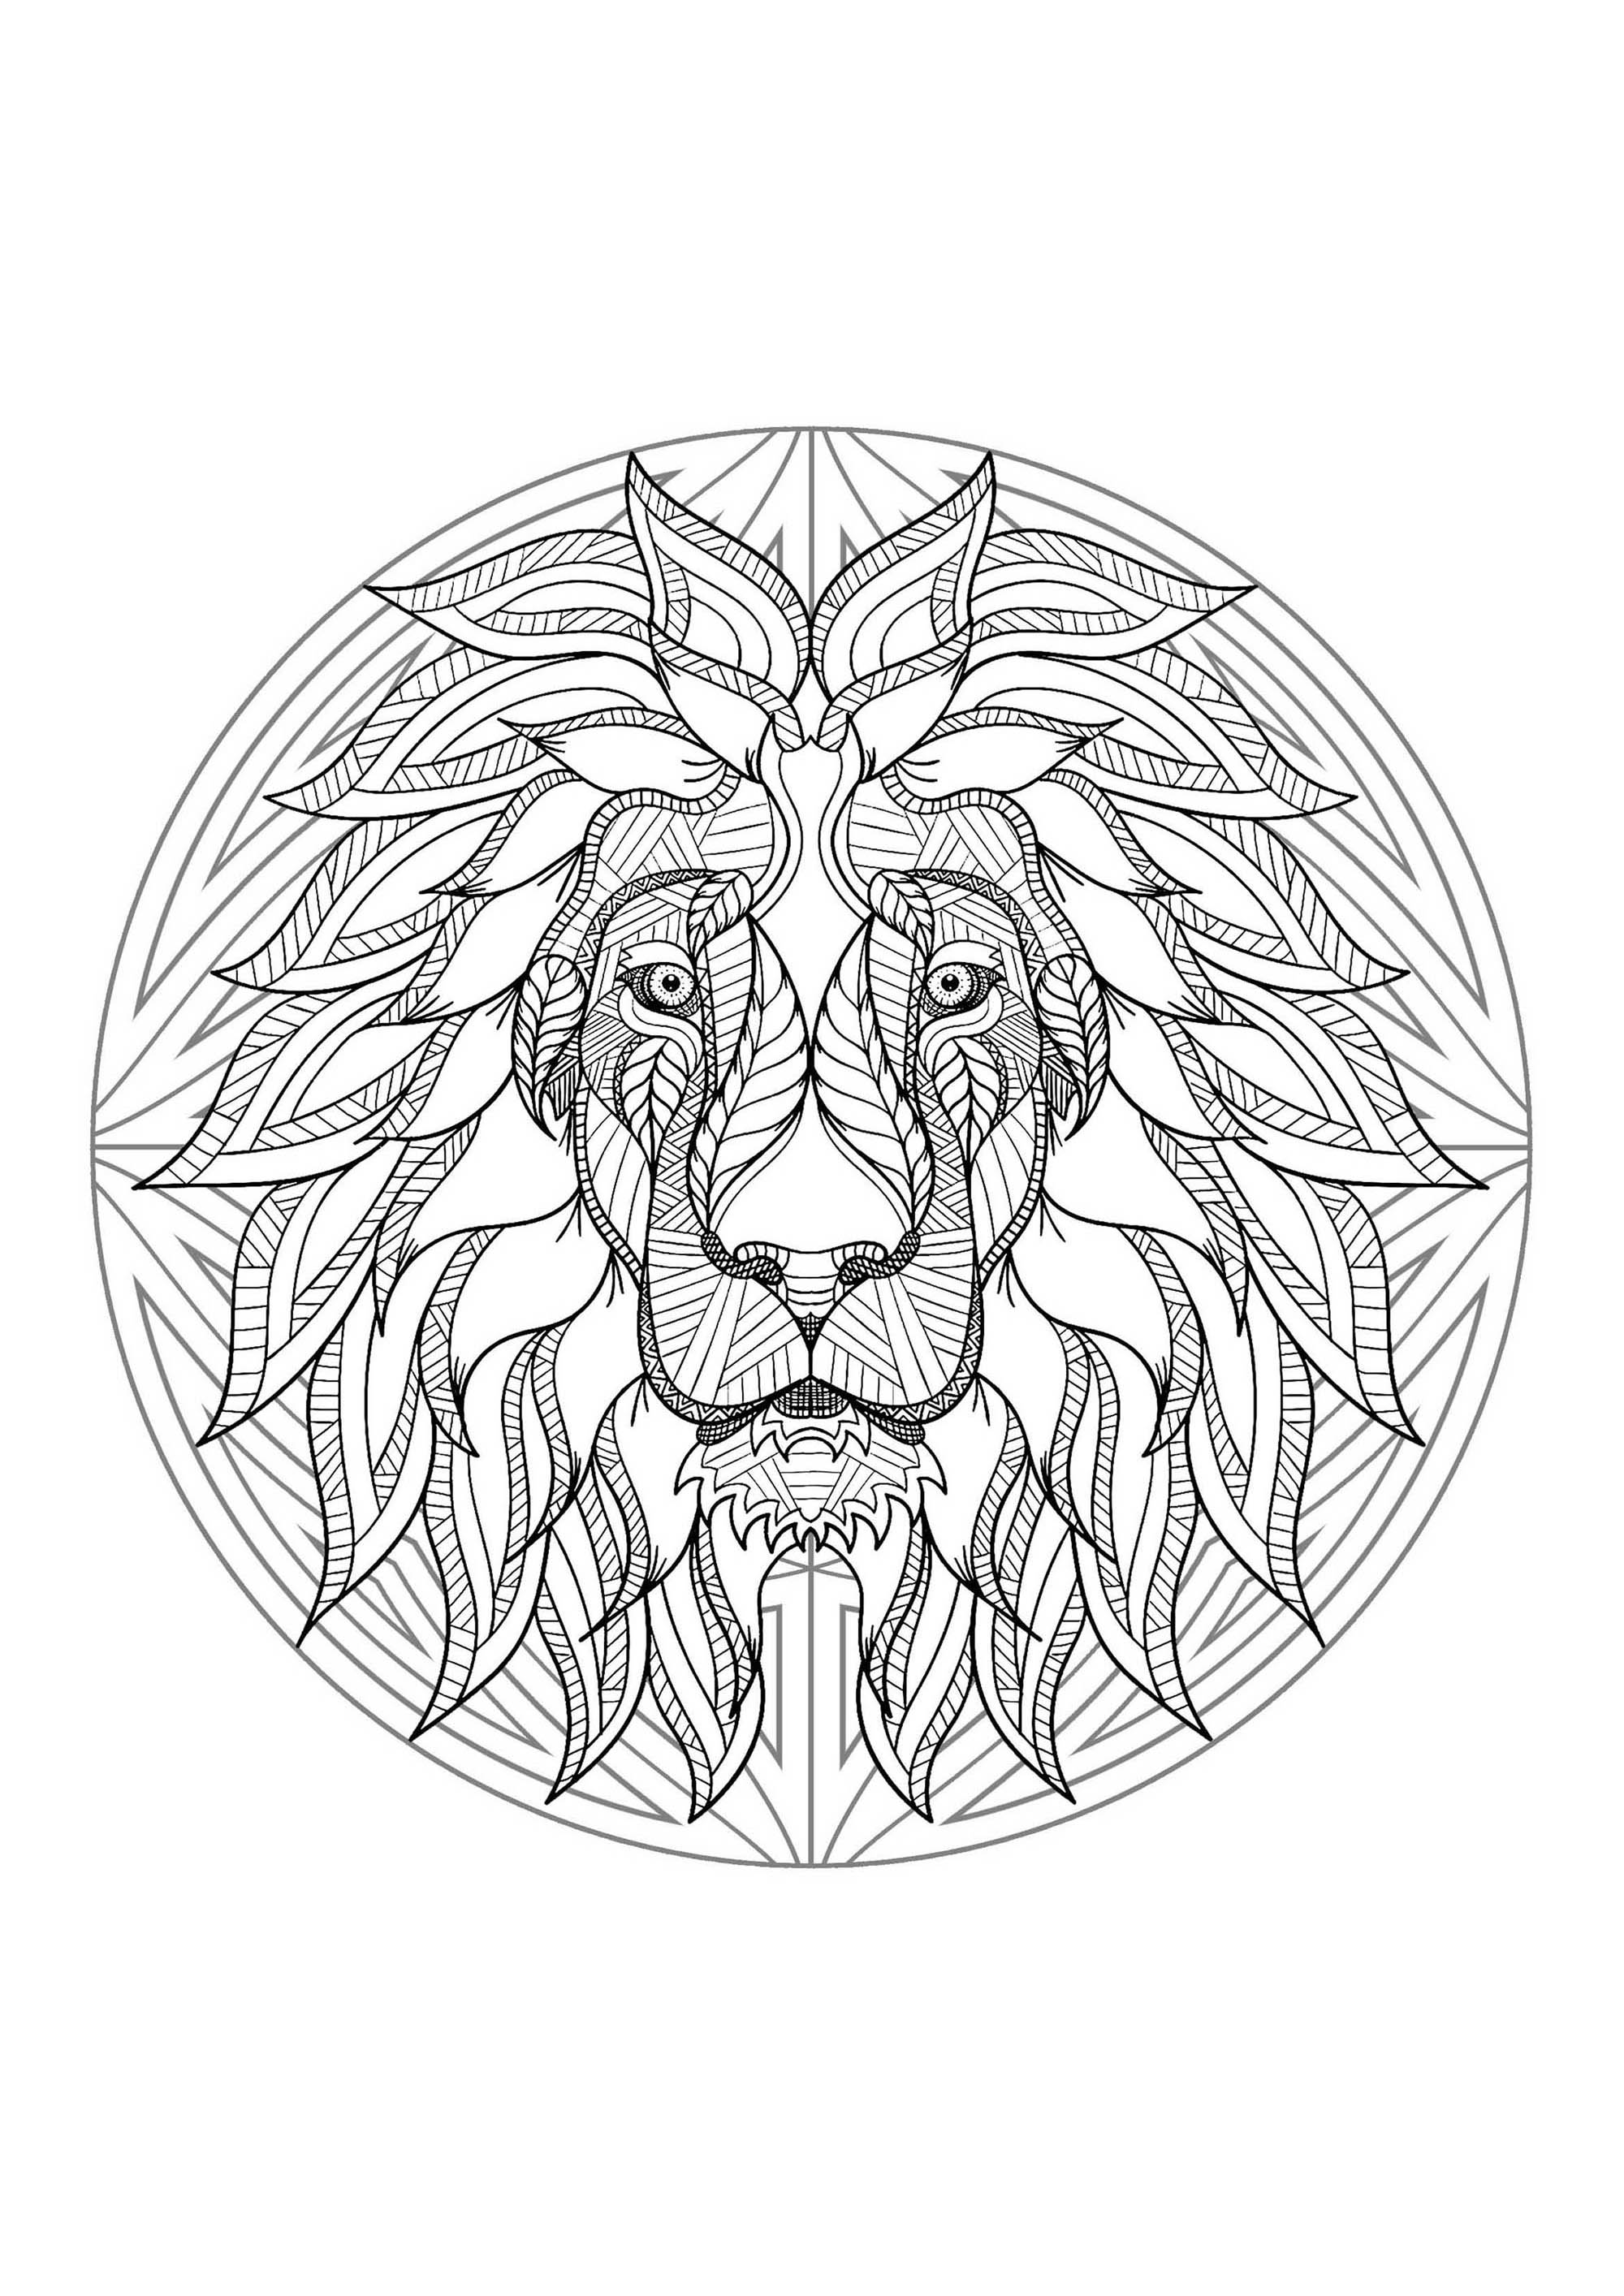 Lion head in a difficult Mandala. A Mandala coloring page with a lot of details, perfect if you like complex coloring pages, and if you like to express your creativity.